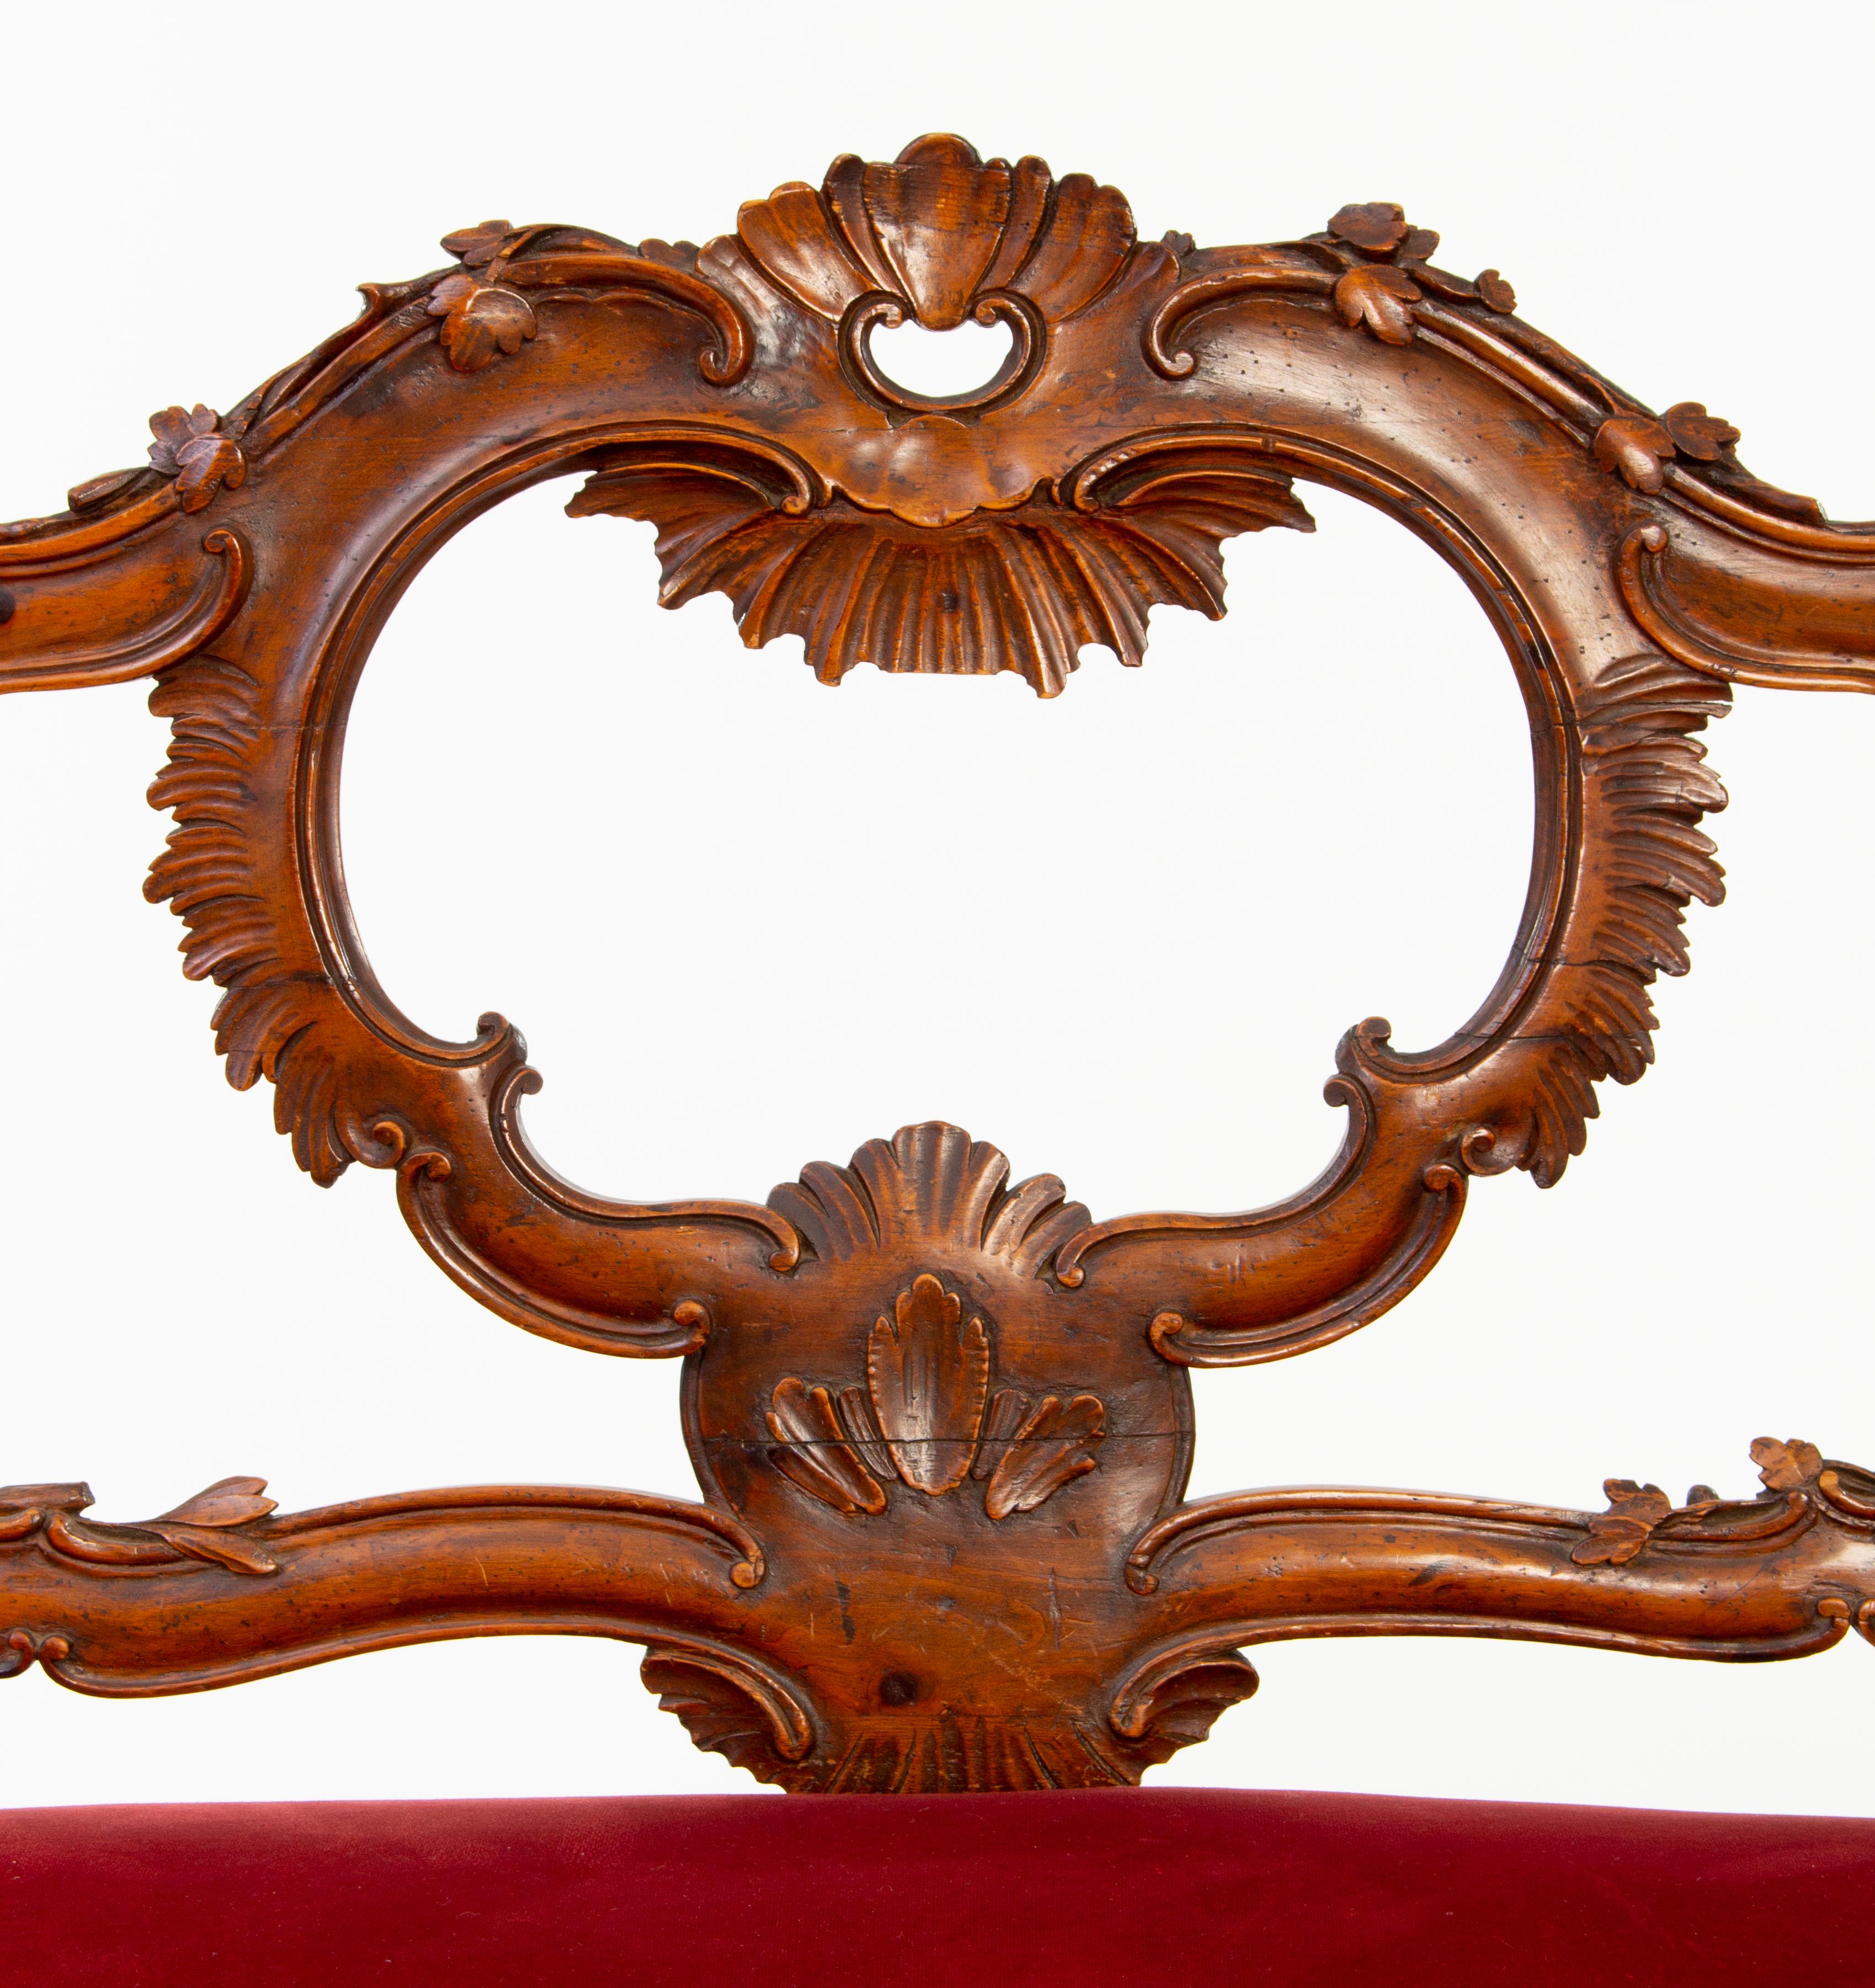 Venetian baroque bench, 19th century.
Walnut carved wood.
Minor crackings and damages.